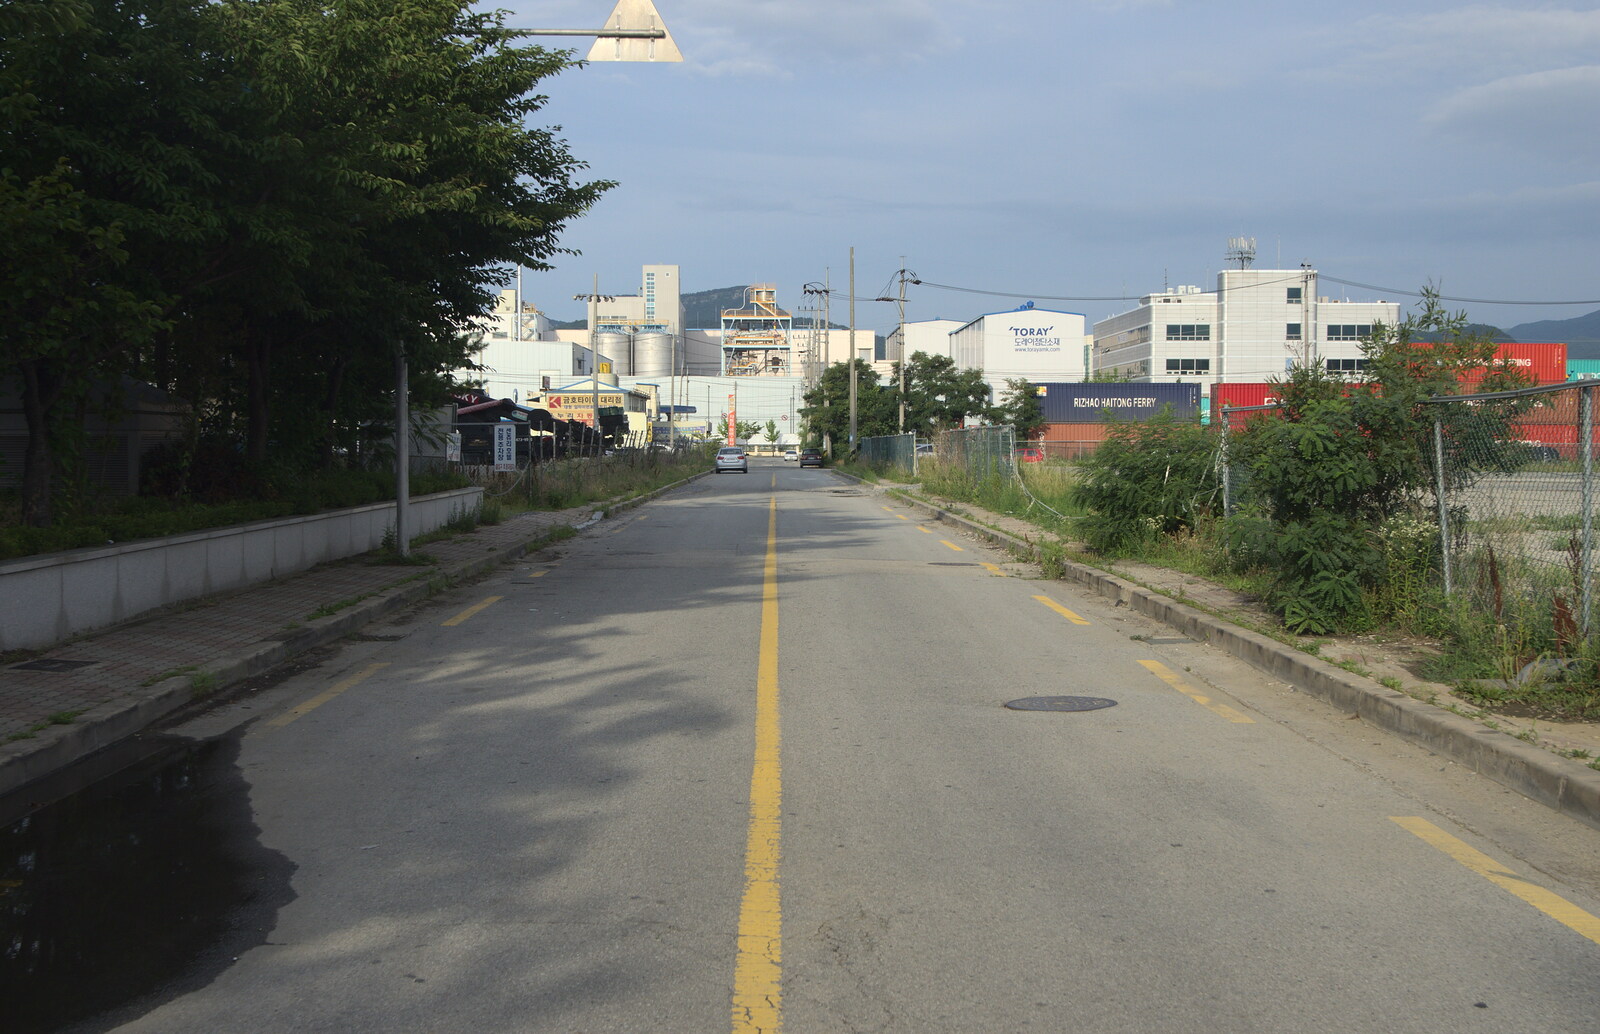 The side street down to the retail park from Seomun Market, Daegu, South Korea - 1st July 2012